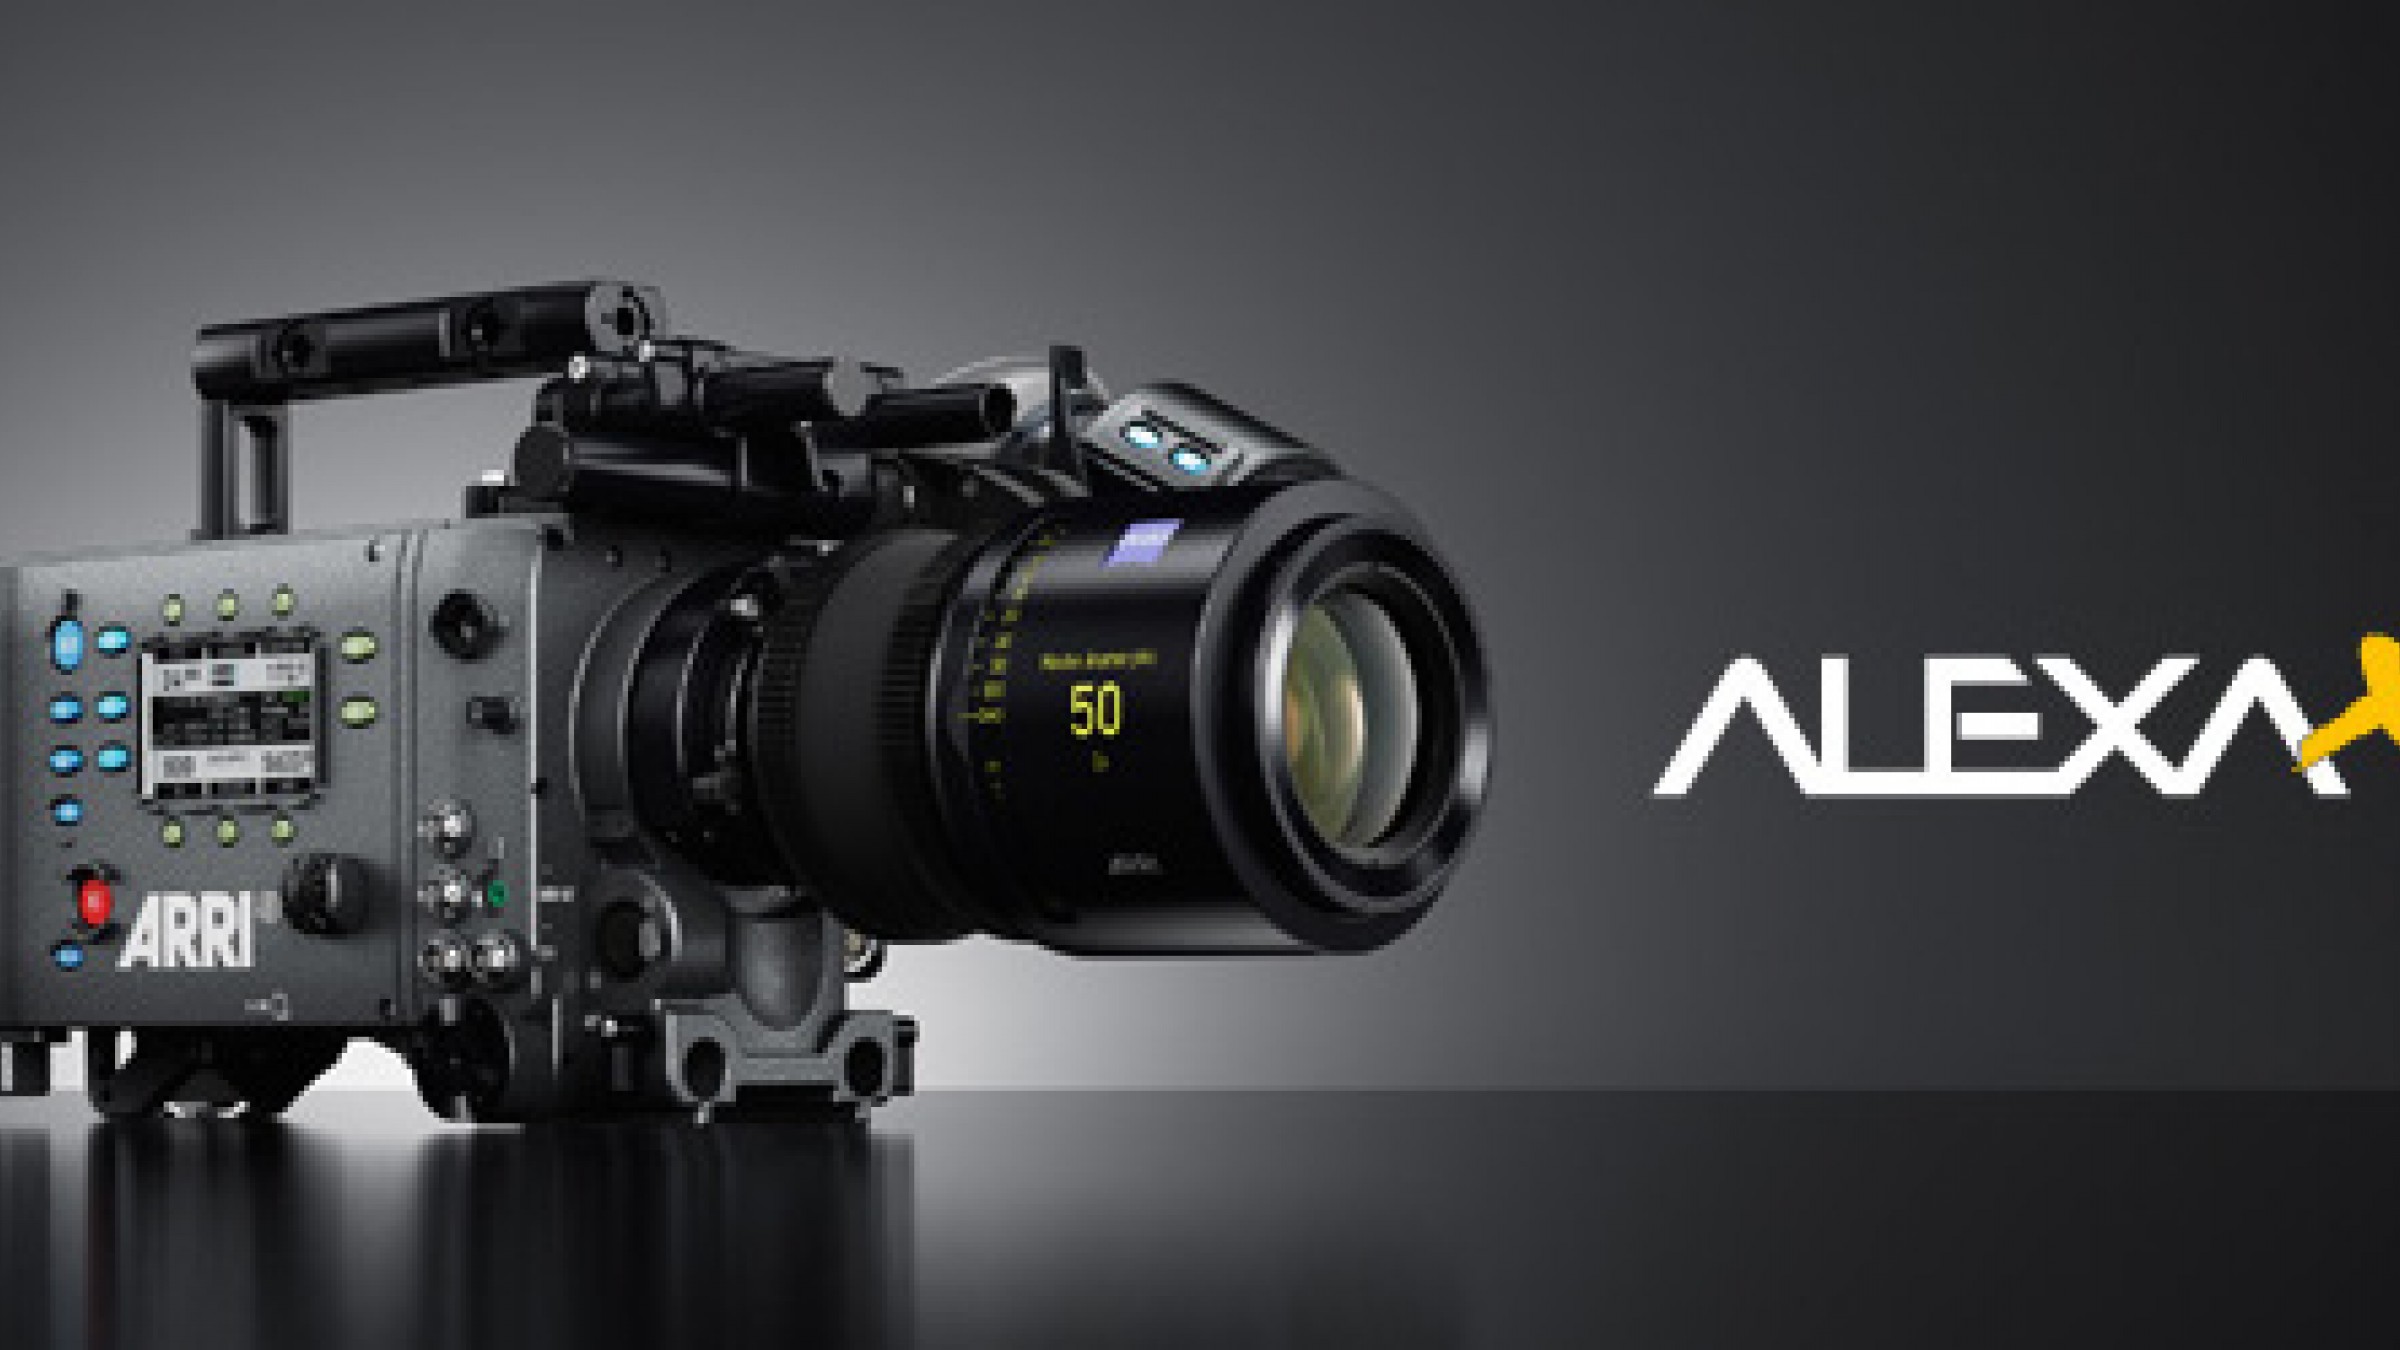 How to Maximize the Image from the ARRI ALEXA for 4K Delivery